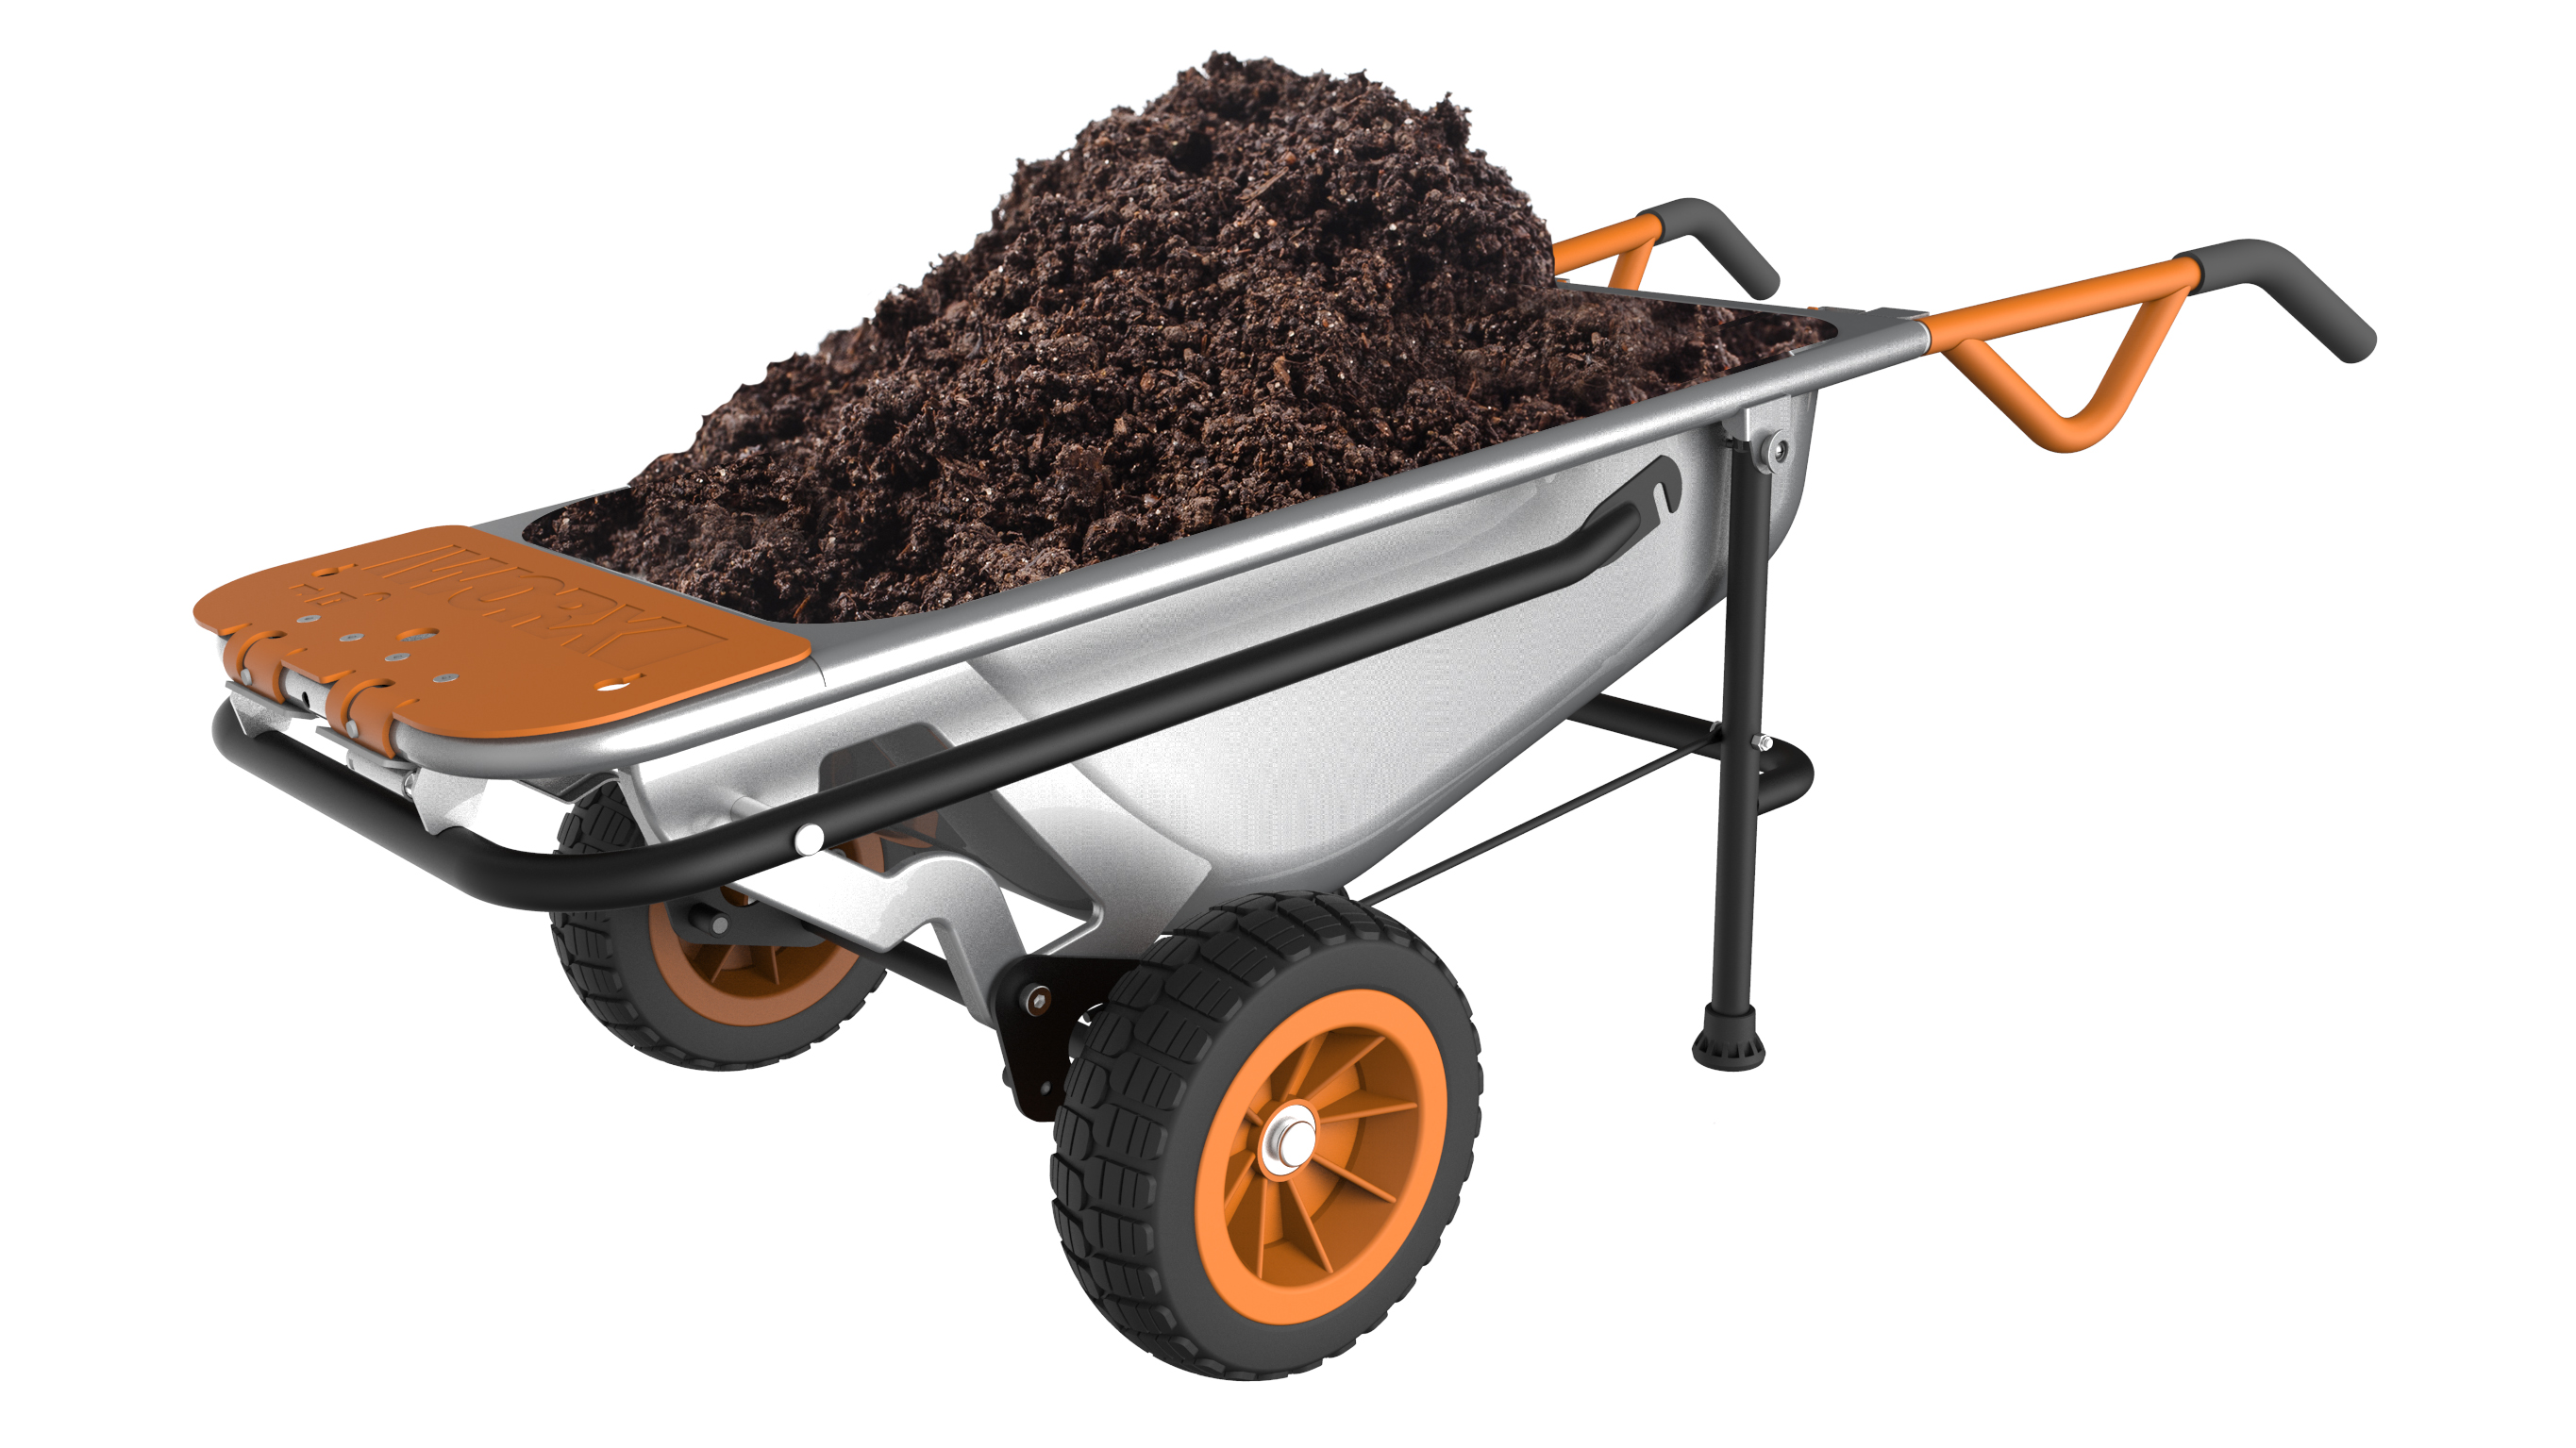 WORX AeroCart transports loads with ease.